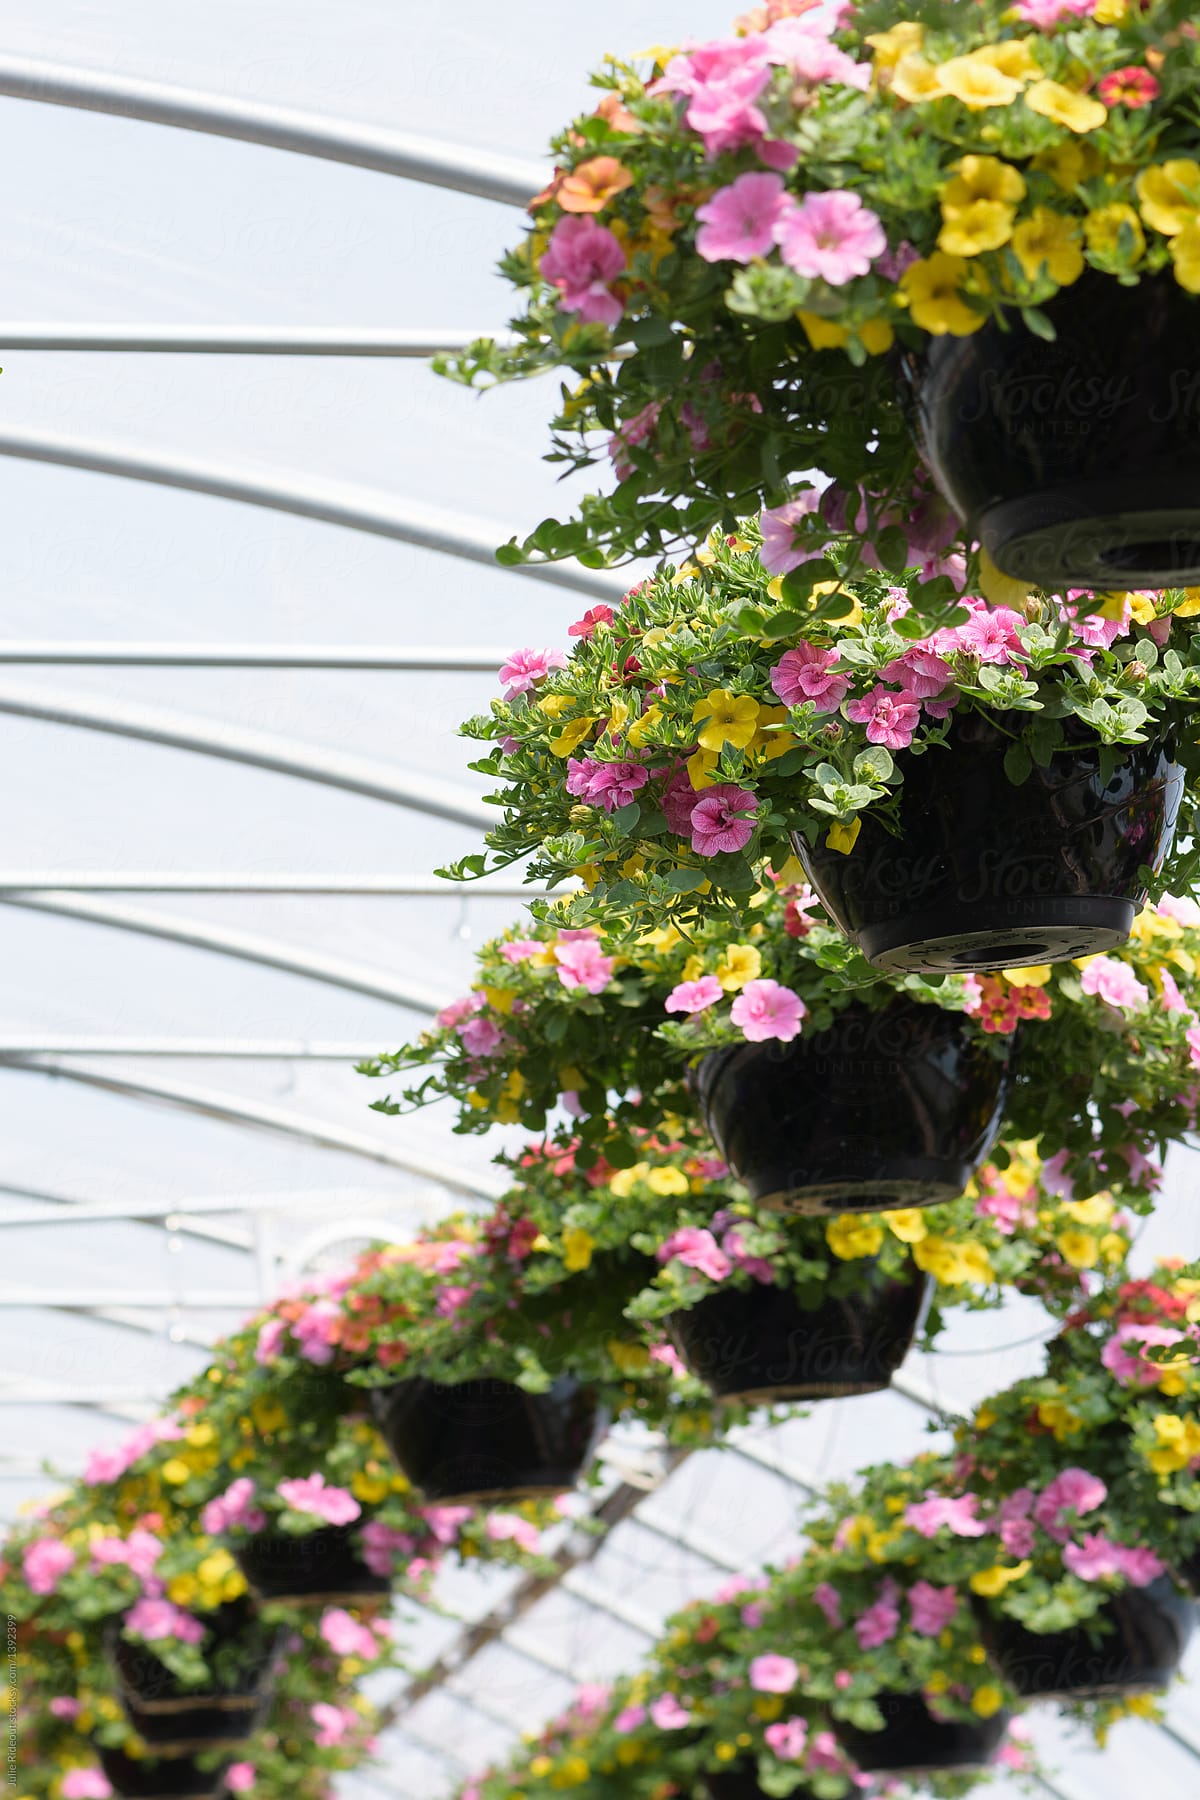 rows of flowering hanging baskets displayed inside a greenhouse